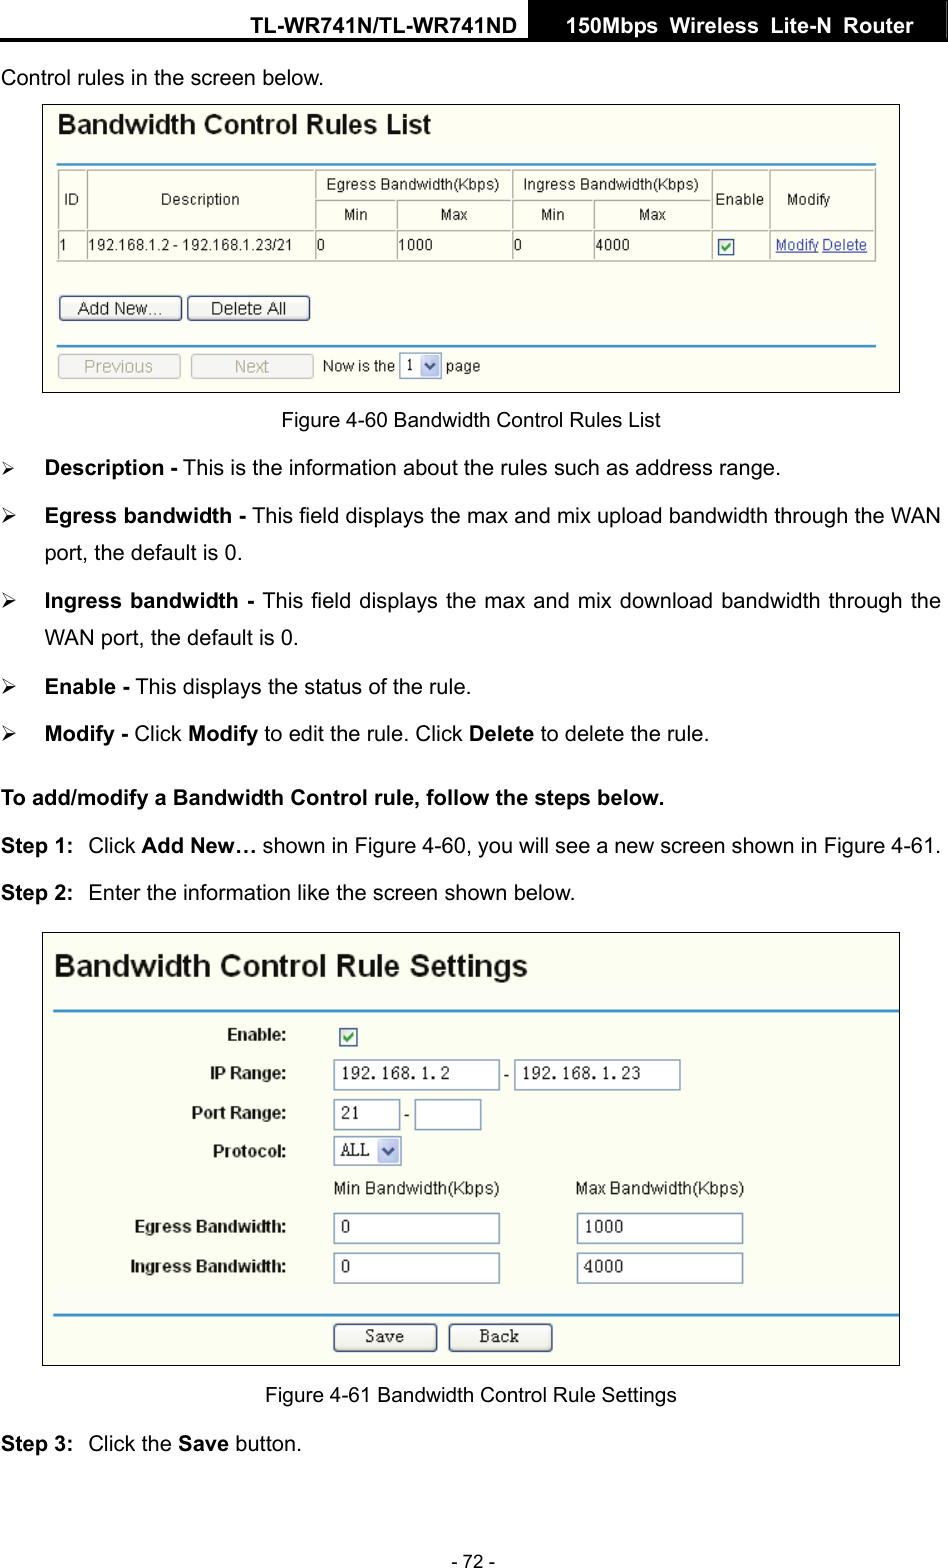 TL-WR741N/TL-WR741ND  150Mbps Wireless Lite-N Router   - 72 - Control rules in the screen below.  Figure 4-60 Bandwidth Control Rules List ¾ Description - This is the information about the rules such as address range. ¾ Egress bandwidth - This field displays the max and mix upload bandwidth through the WAN port, the default is 0. ¾ Ingress bandwidth - This field displays the max and mix download bandwidth through the WAN port, the default is 0. ¾ Enable - This displays the status of the rule. ¾ Modify - Click Modify to edit the rule. Click Delete to delete the rule. To add/modify a Bandwidth Control rule, follow the steps below. Step 1:  Click Add New… shown in Figure 4-60, you will see a new screen shown in Figure 4-61. Step 2:  Enter the information like the screen shown below.  Figure 4-61 Bandwidth Control Rule Settings Step 3:  Click the Save button. 